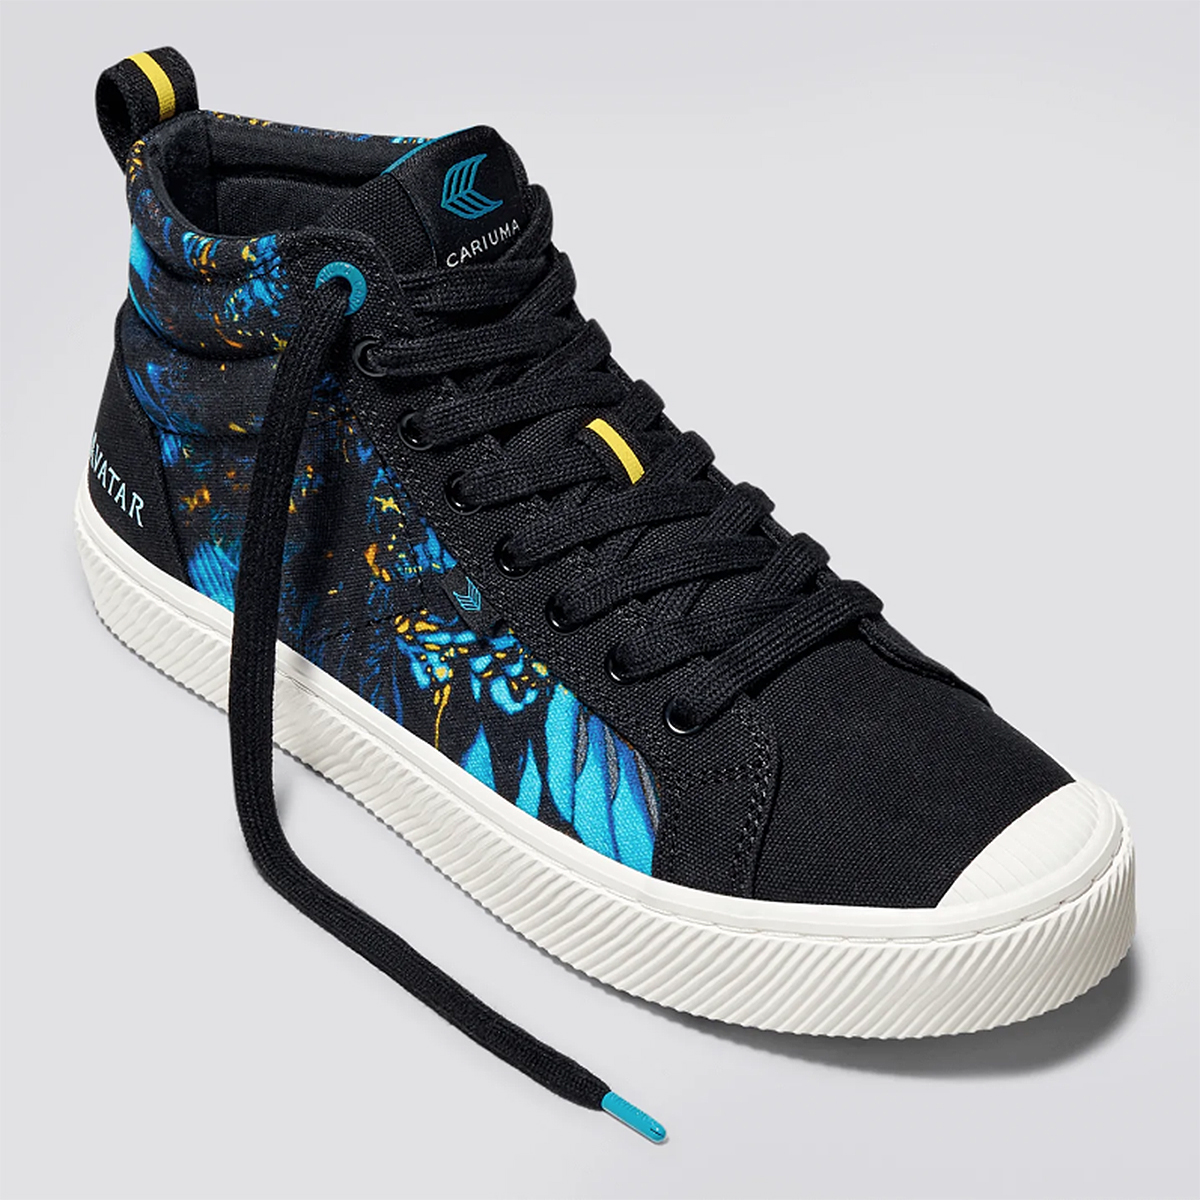 Cariuma Avatar Sneakers: Shop Before They're Gone for Good